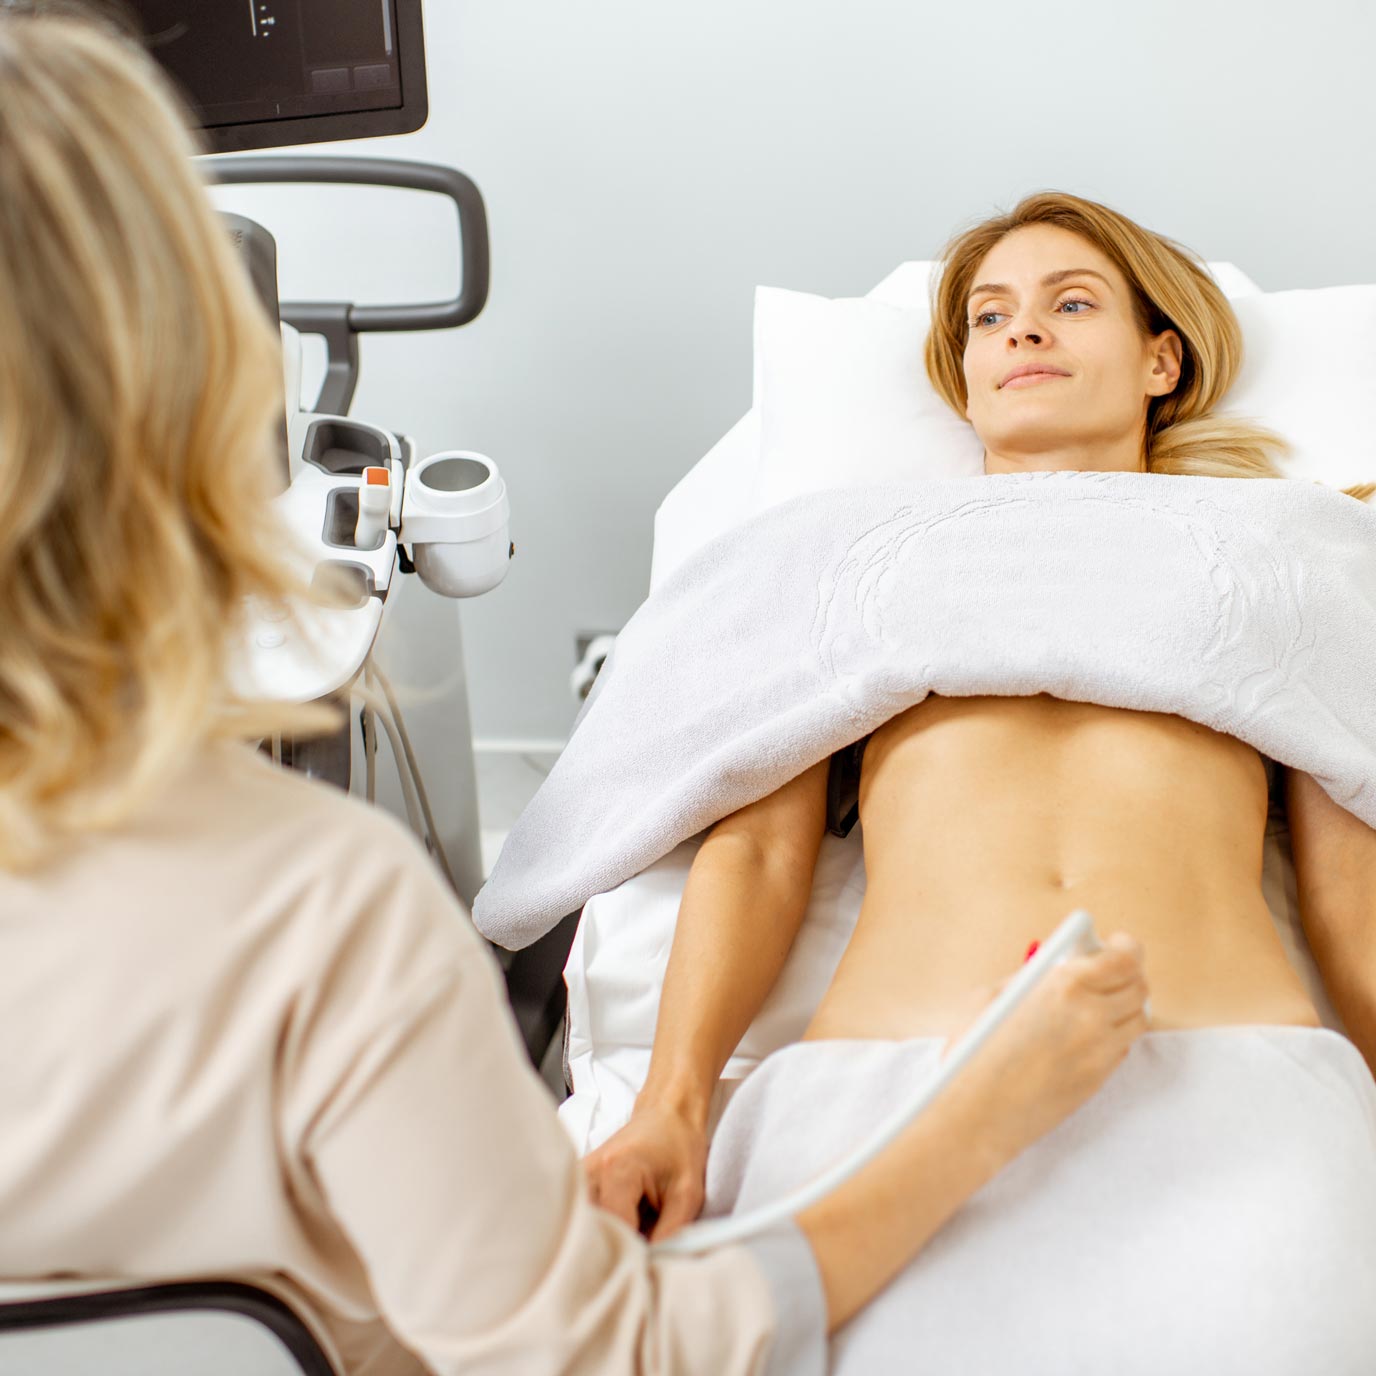 Read about how pelvic ultrasound scans are used to monitor patients on BHRT and detect gynaecological conditions